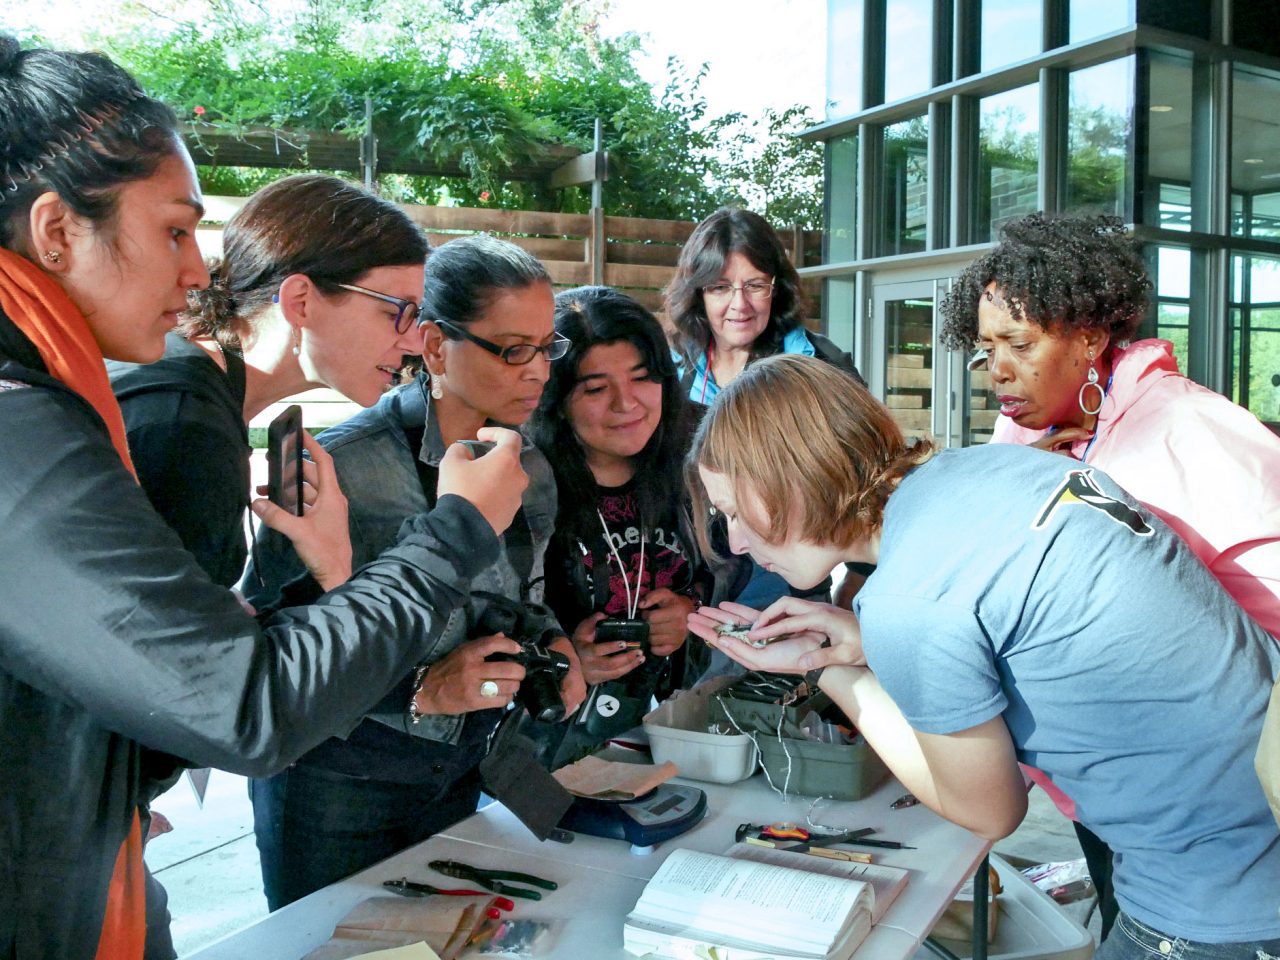 Participants gather around a table during a bird banding demonstration